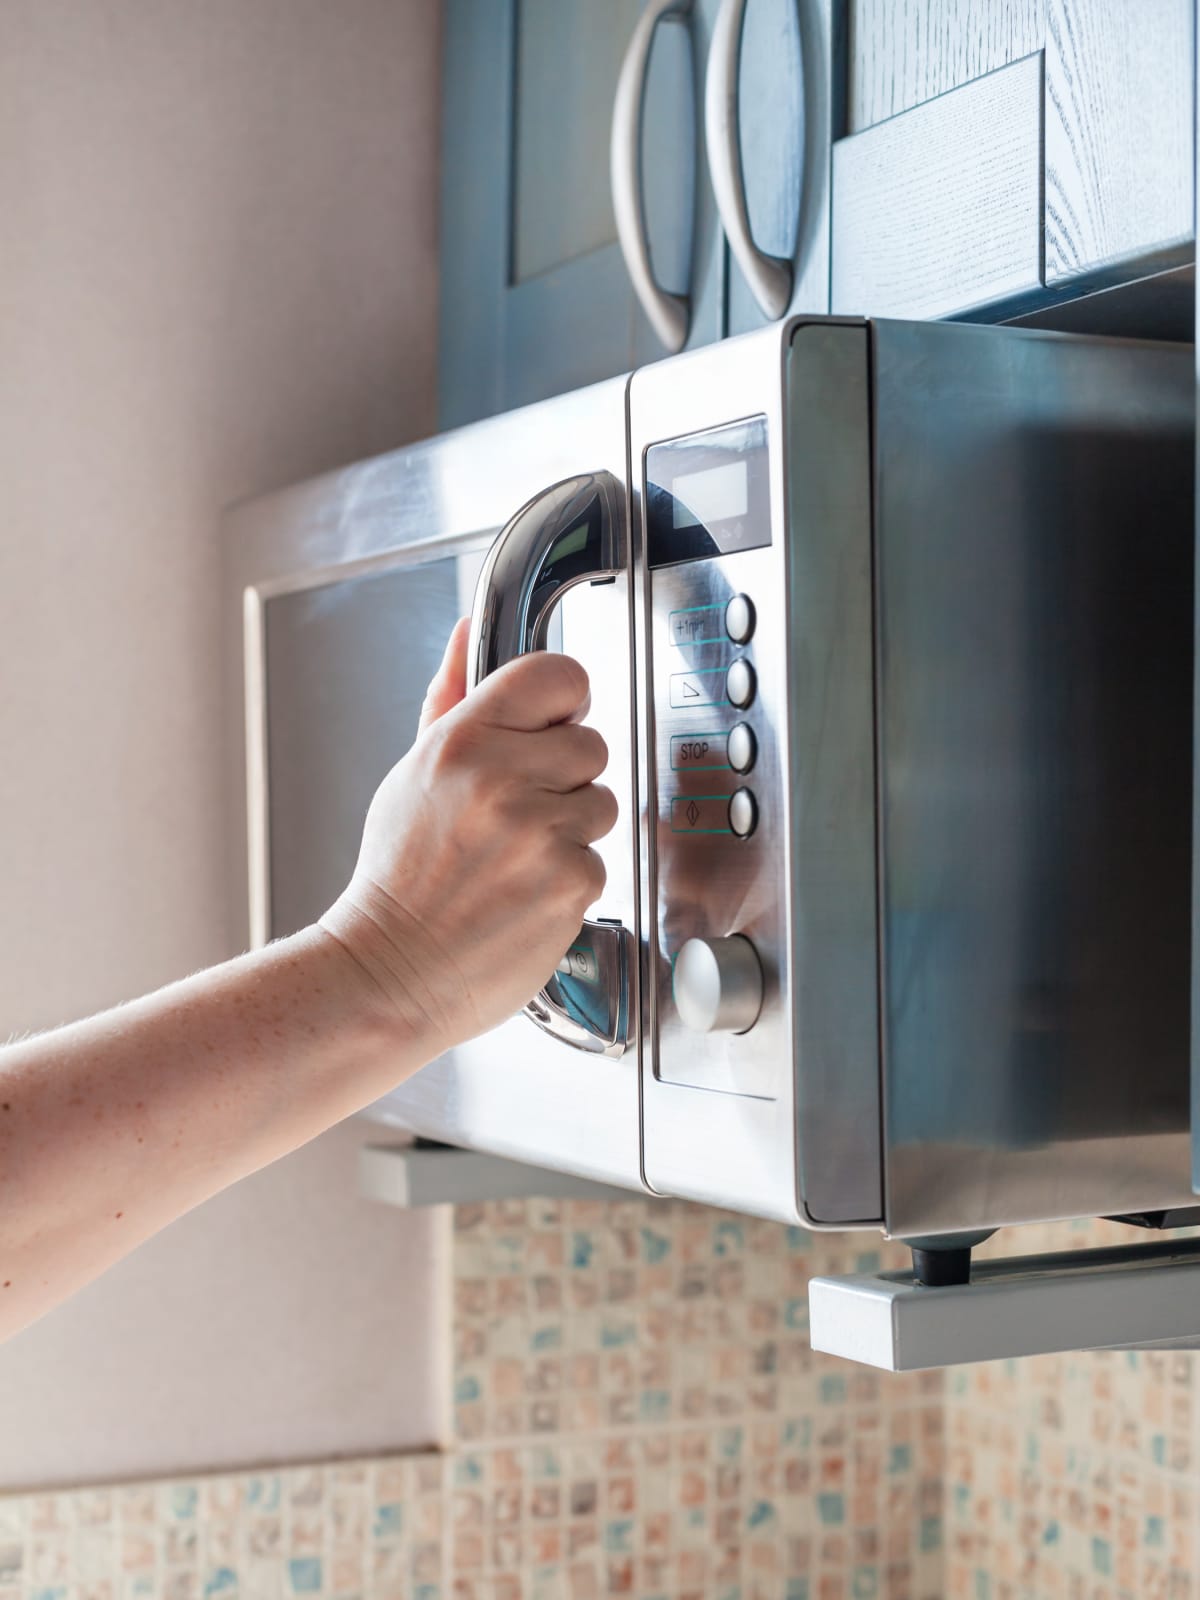 A person holding a microwave door handle